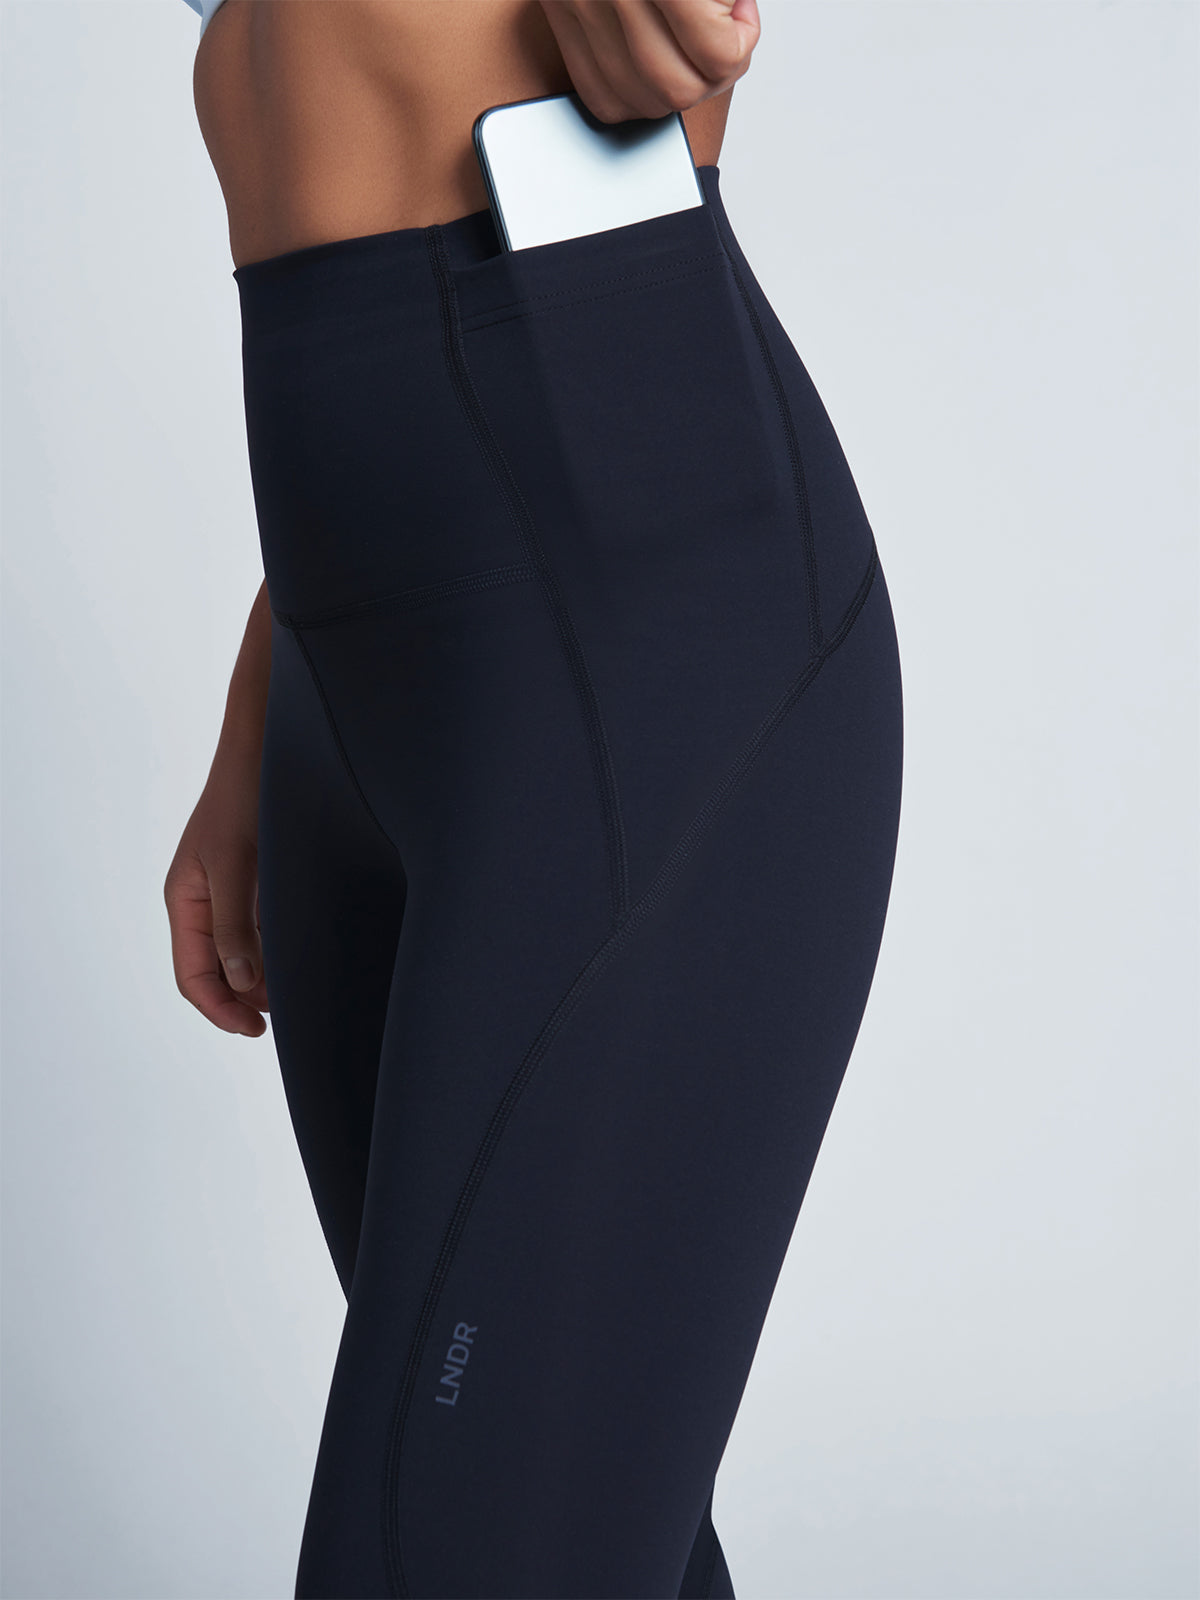 THE OUTER LIMITS SUPER HIGH RISE 7/8 Legging Black